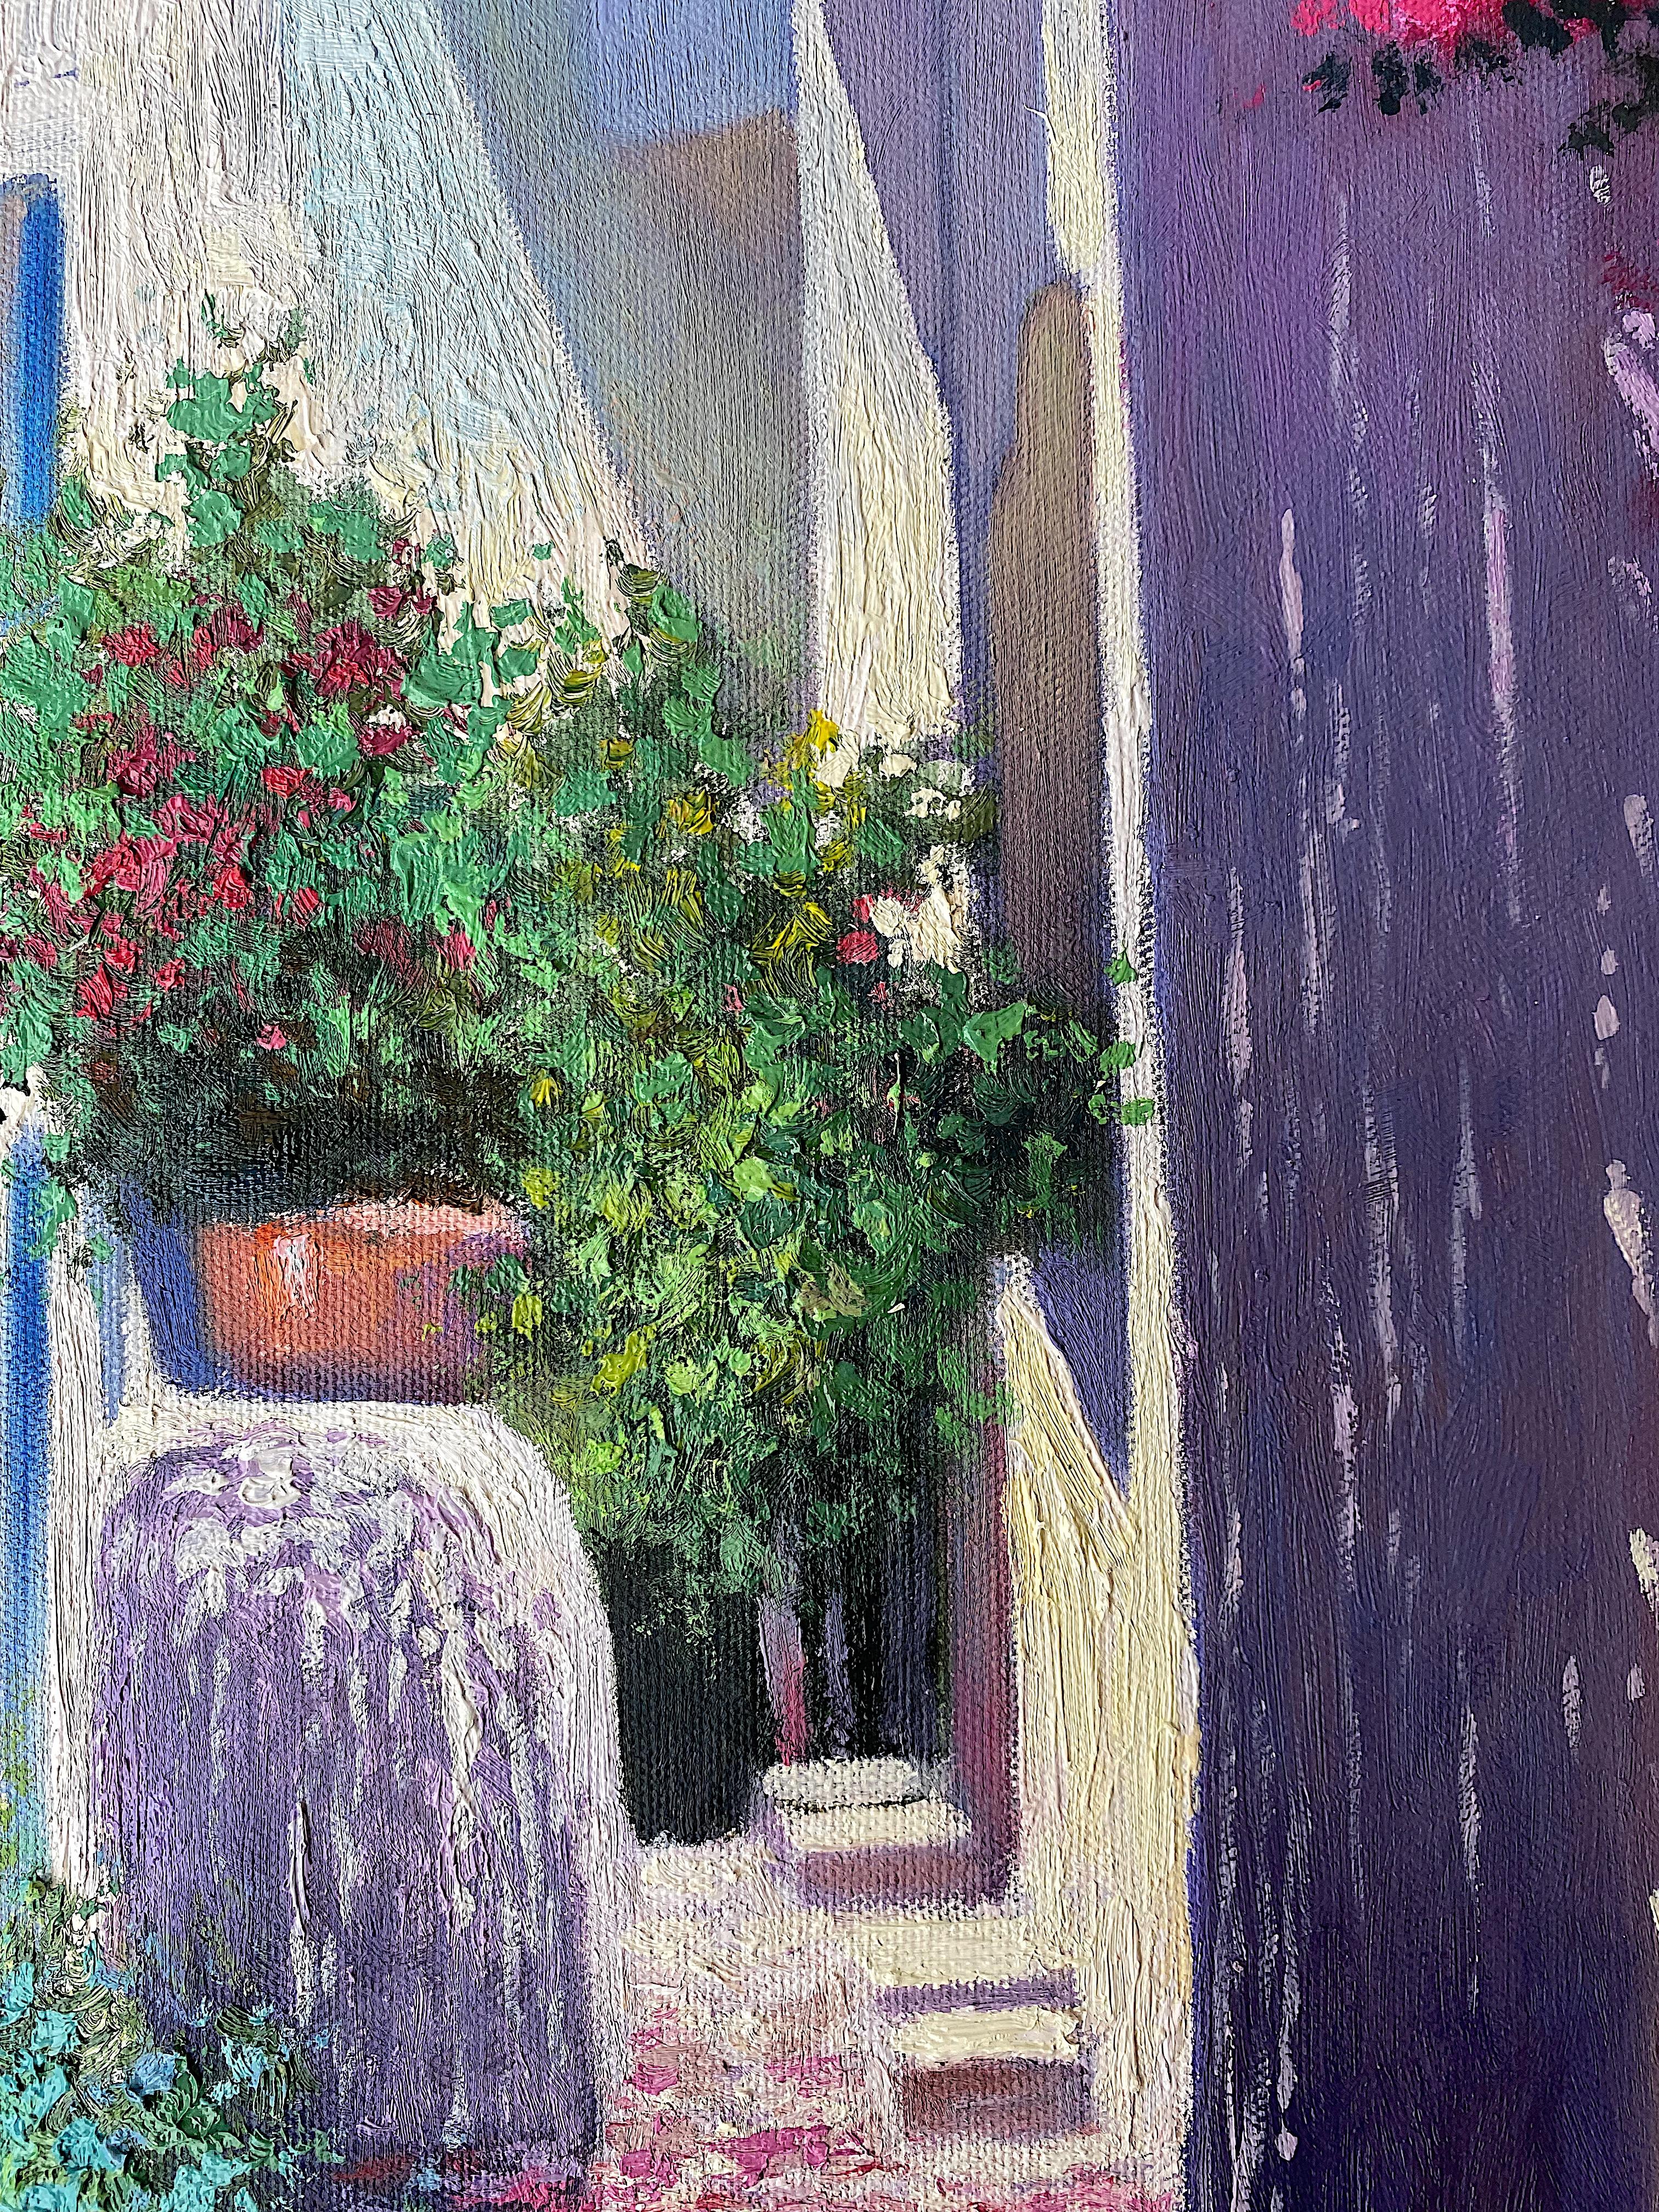 Pathway in Greece I - Original oil painting - Impressionist - Painting by Sonco Carrasco